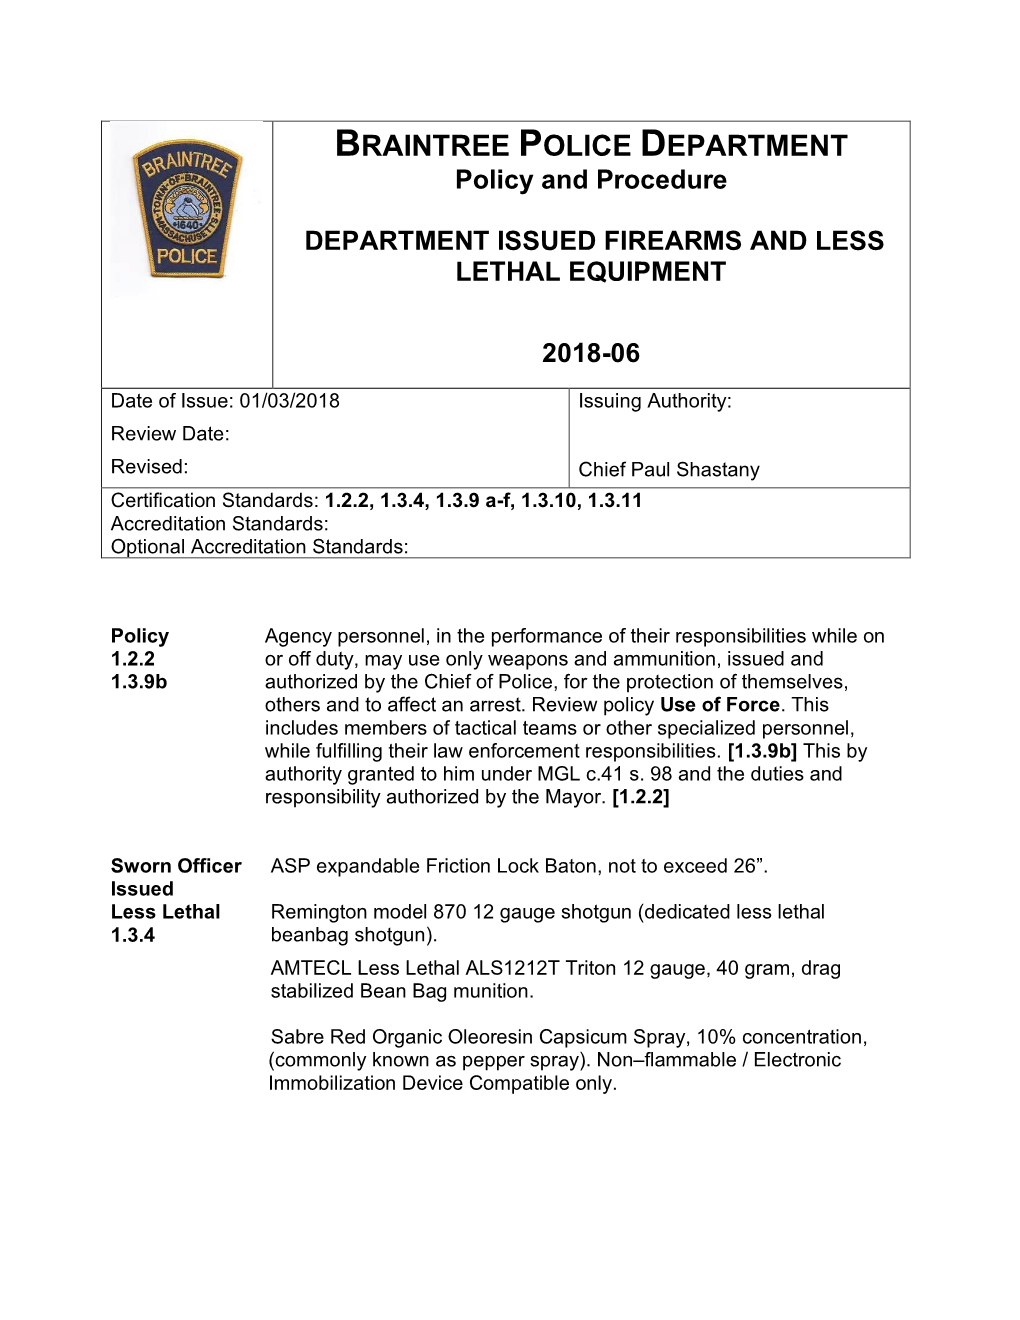 Department Issue Firearms and Less Lethal Equipment